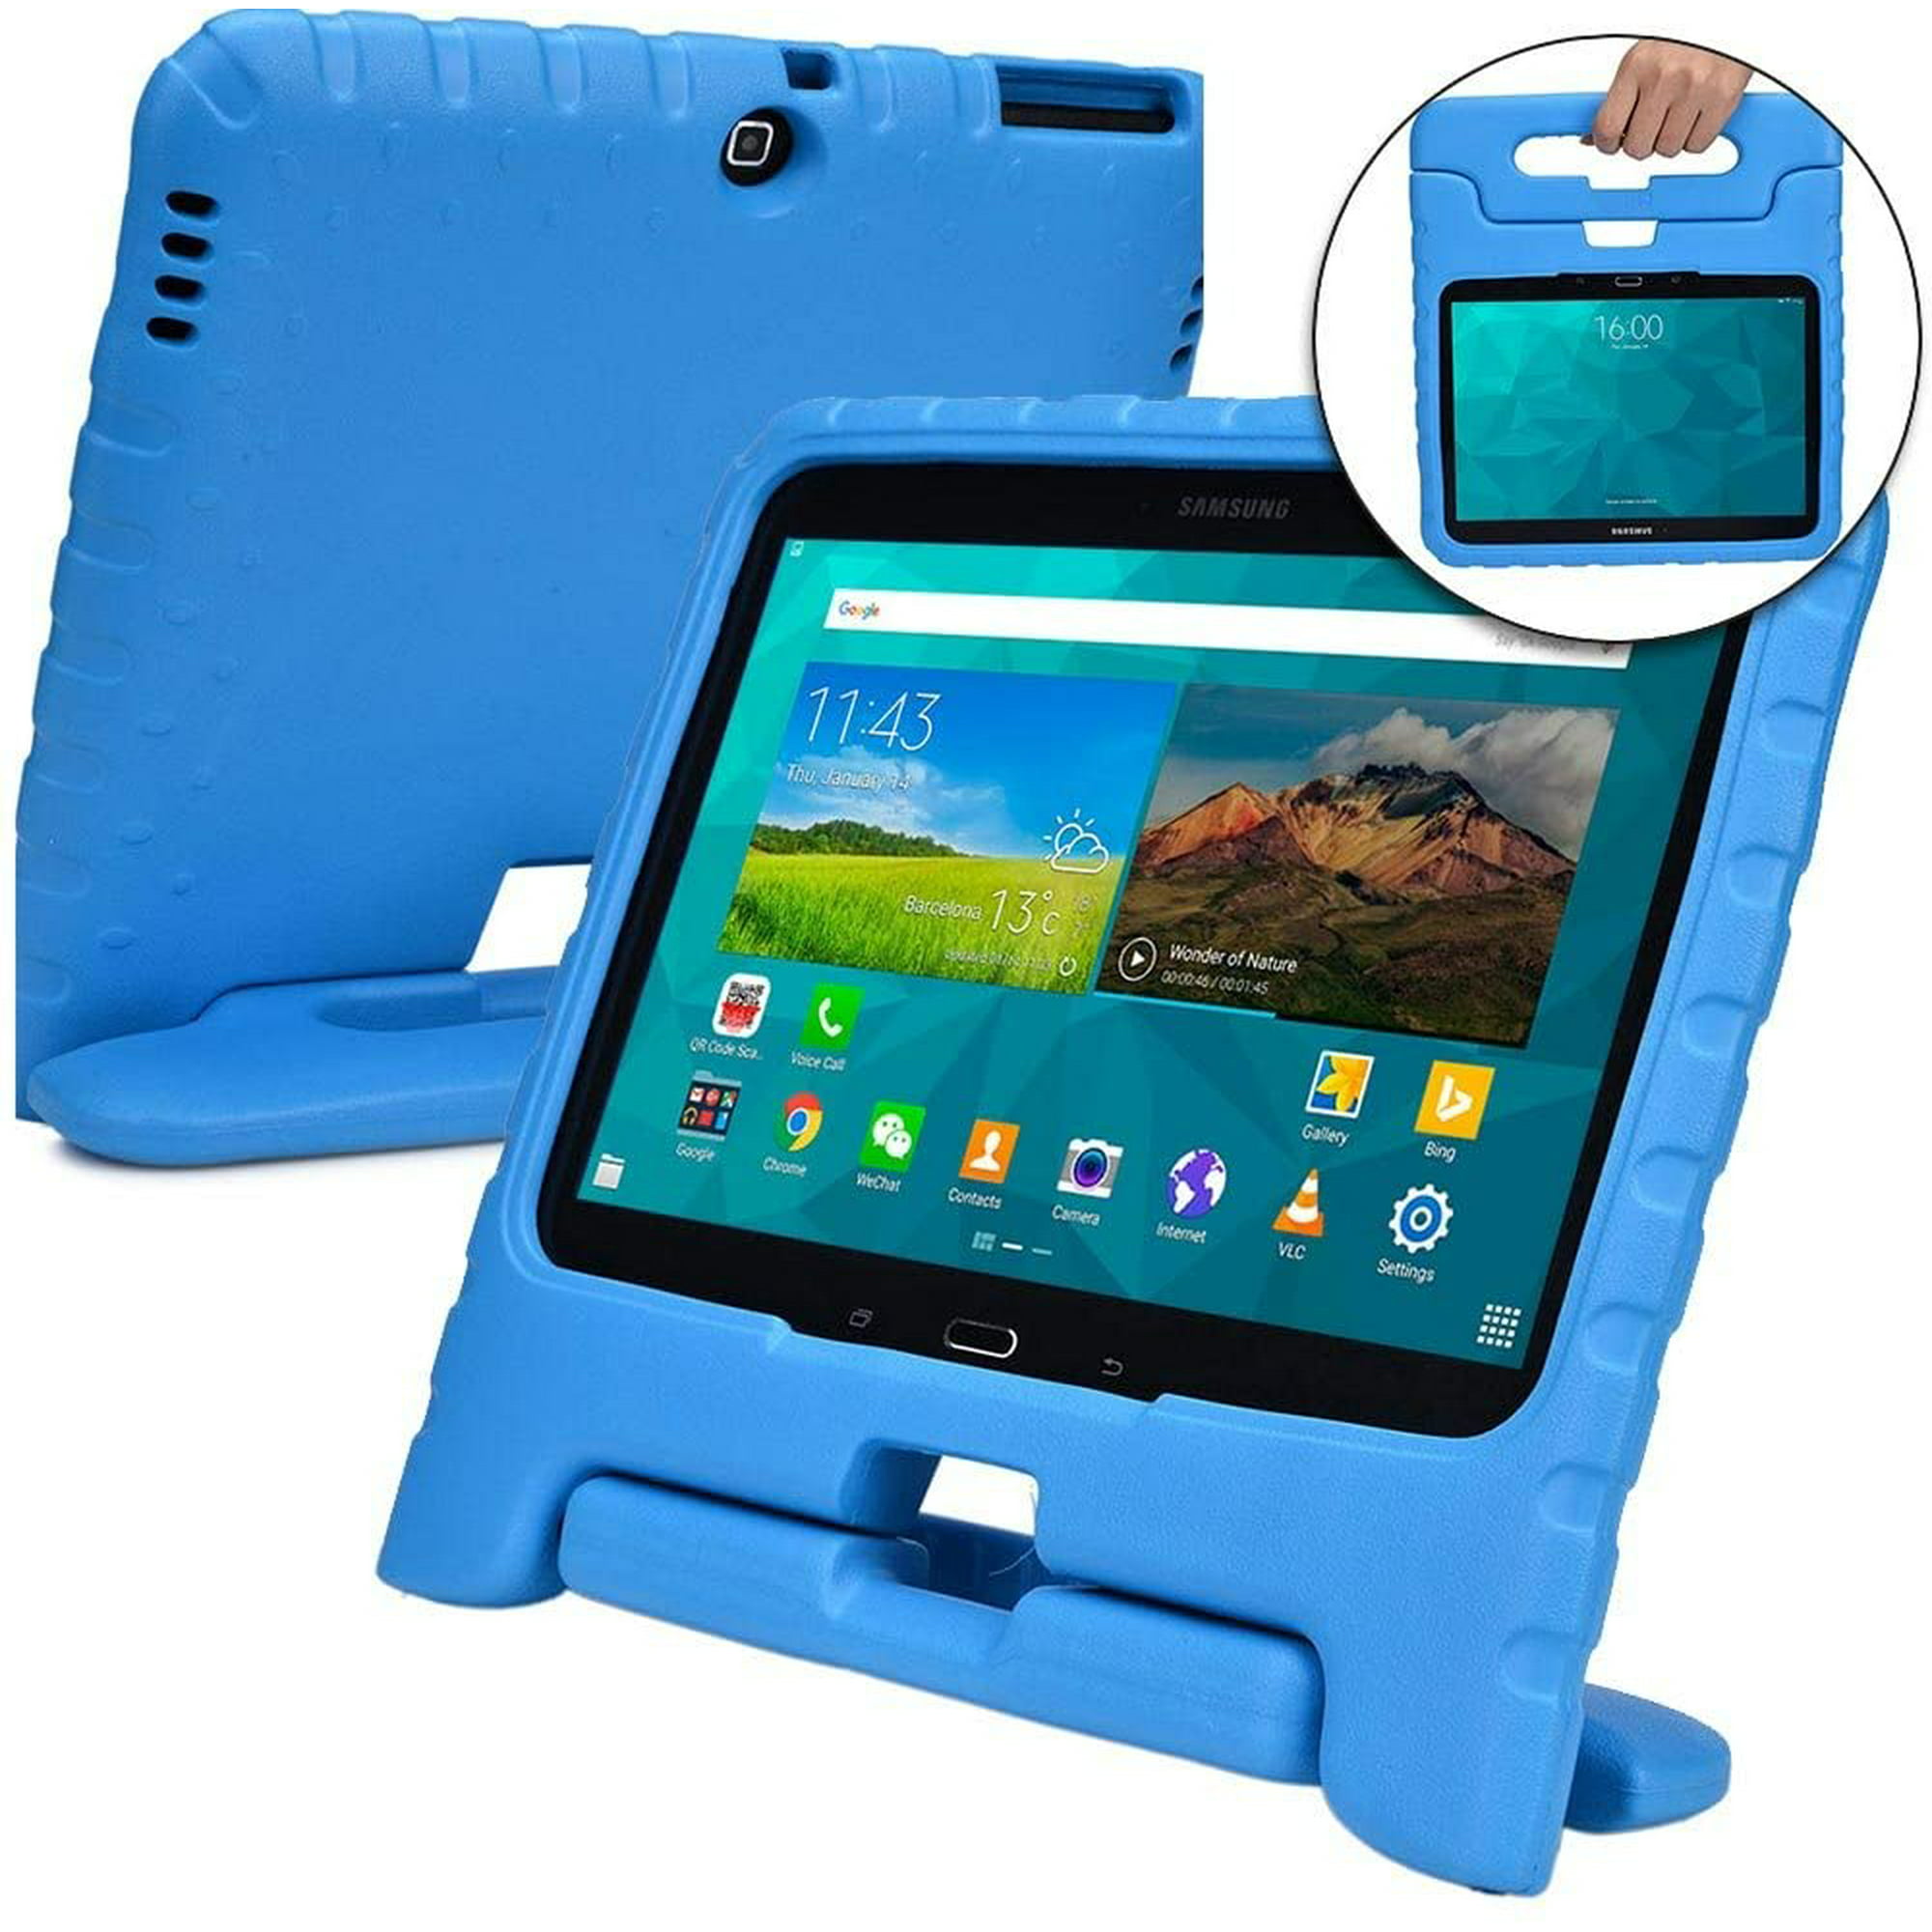 capsule Groene bonen emmer Cooper Dynamo [Rugged Kids Case] Protective Case for Samsung Tab 4 10.1, Tab  3 10.1 | Child Proof Cover with Stand, | Walmart Canada